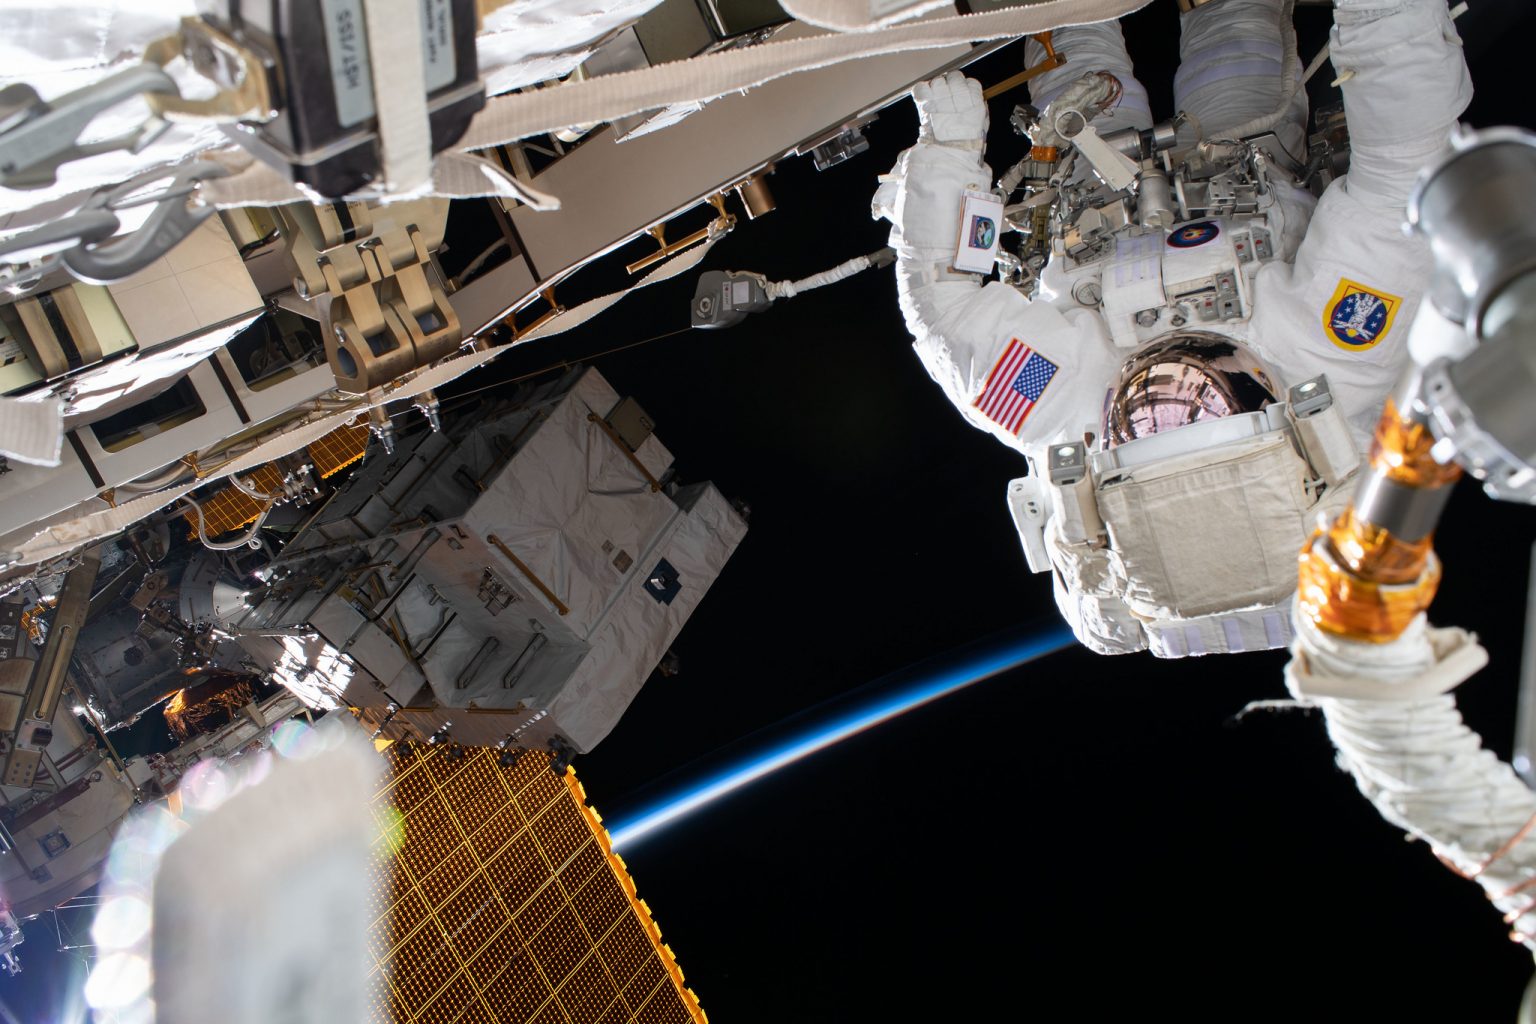 Two NASA astronauts are spacewalking outside the ISS right now DLSServe